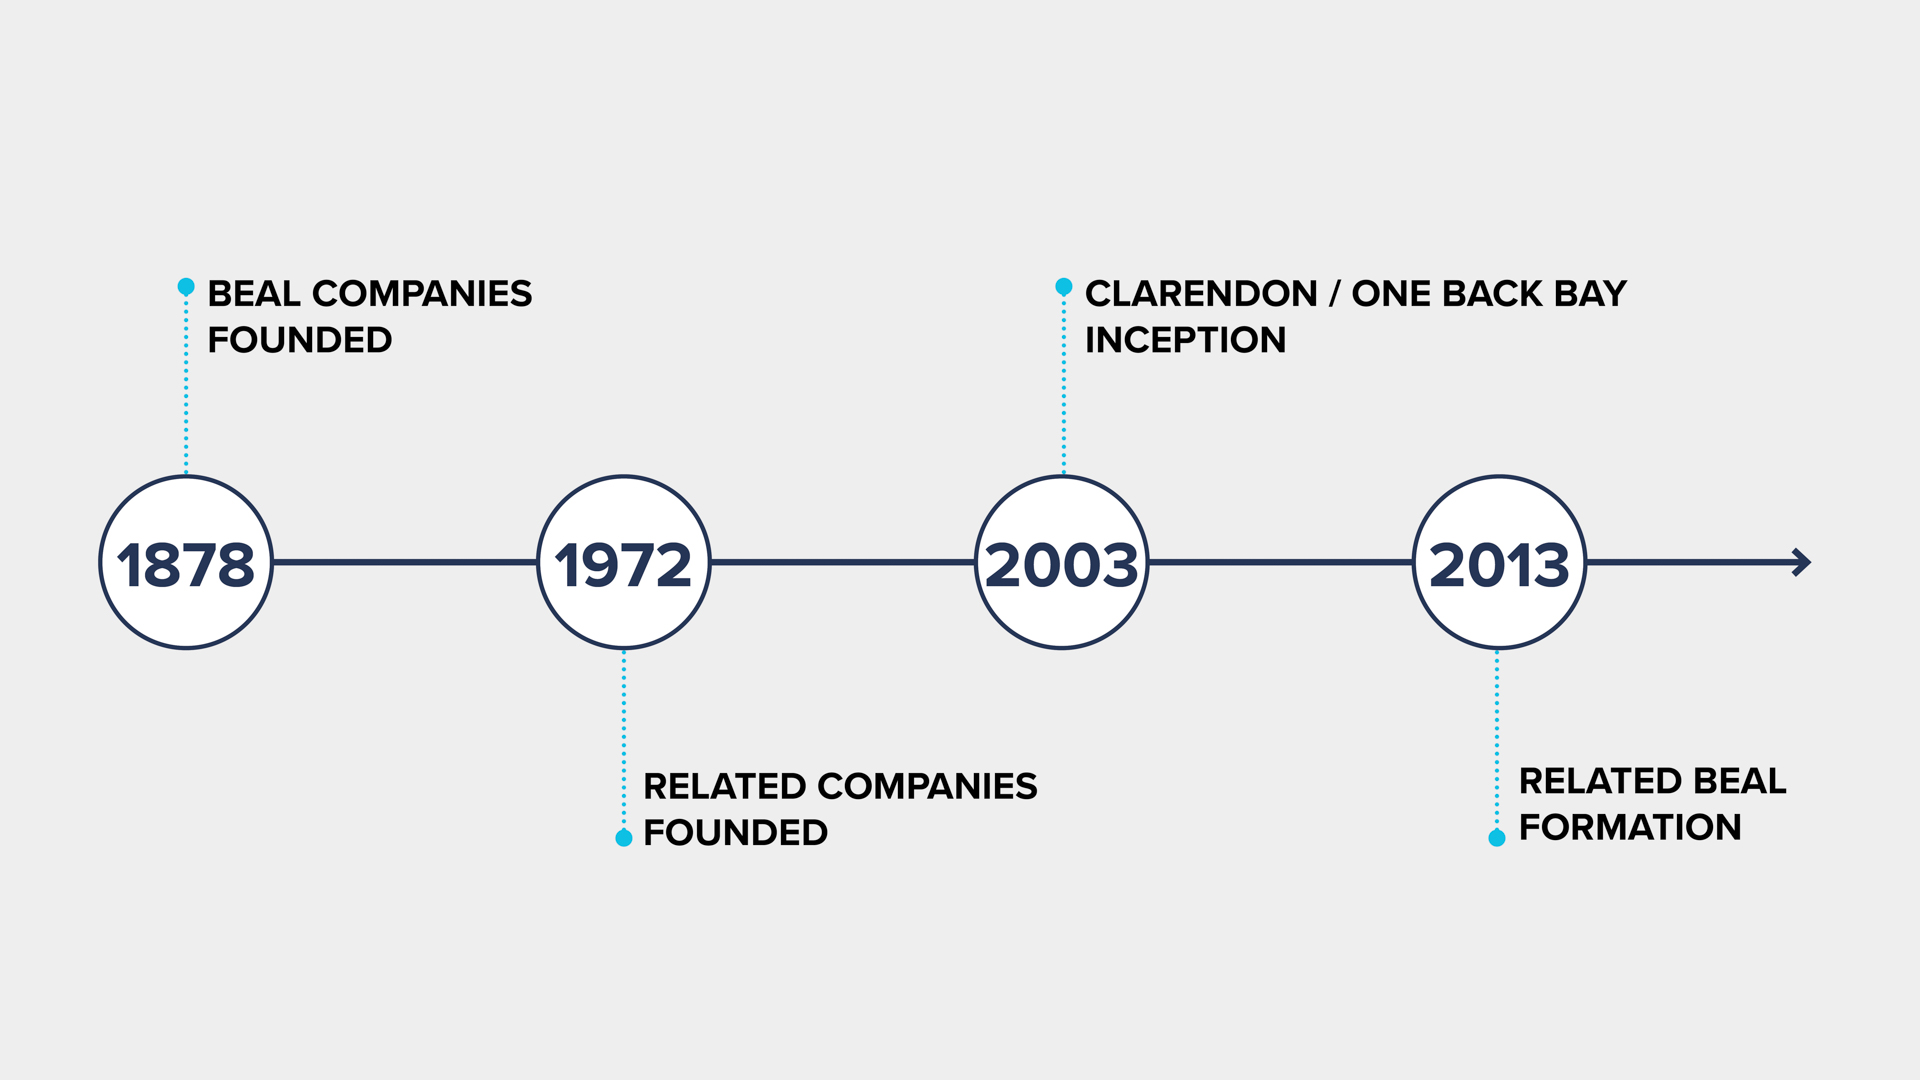 Beal Companies Founded in 1878, Related Companies Founded 1972, Clarendon/One Back Bay Inception 2003, Related Beal Formation 2013